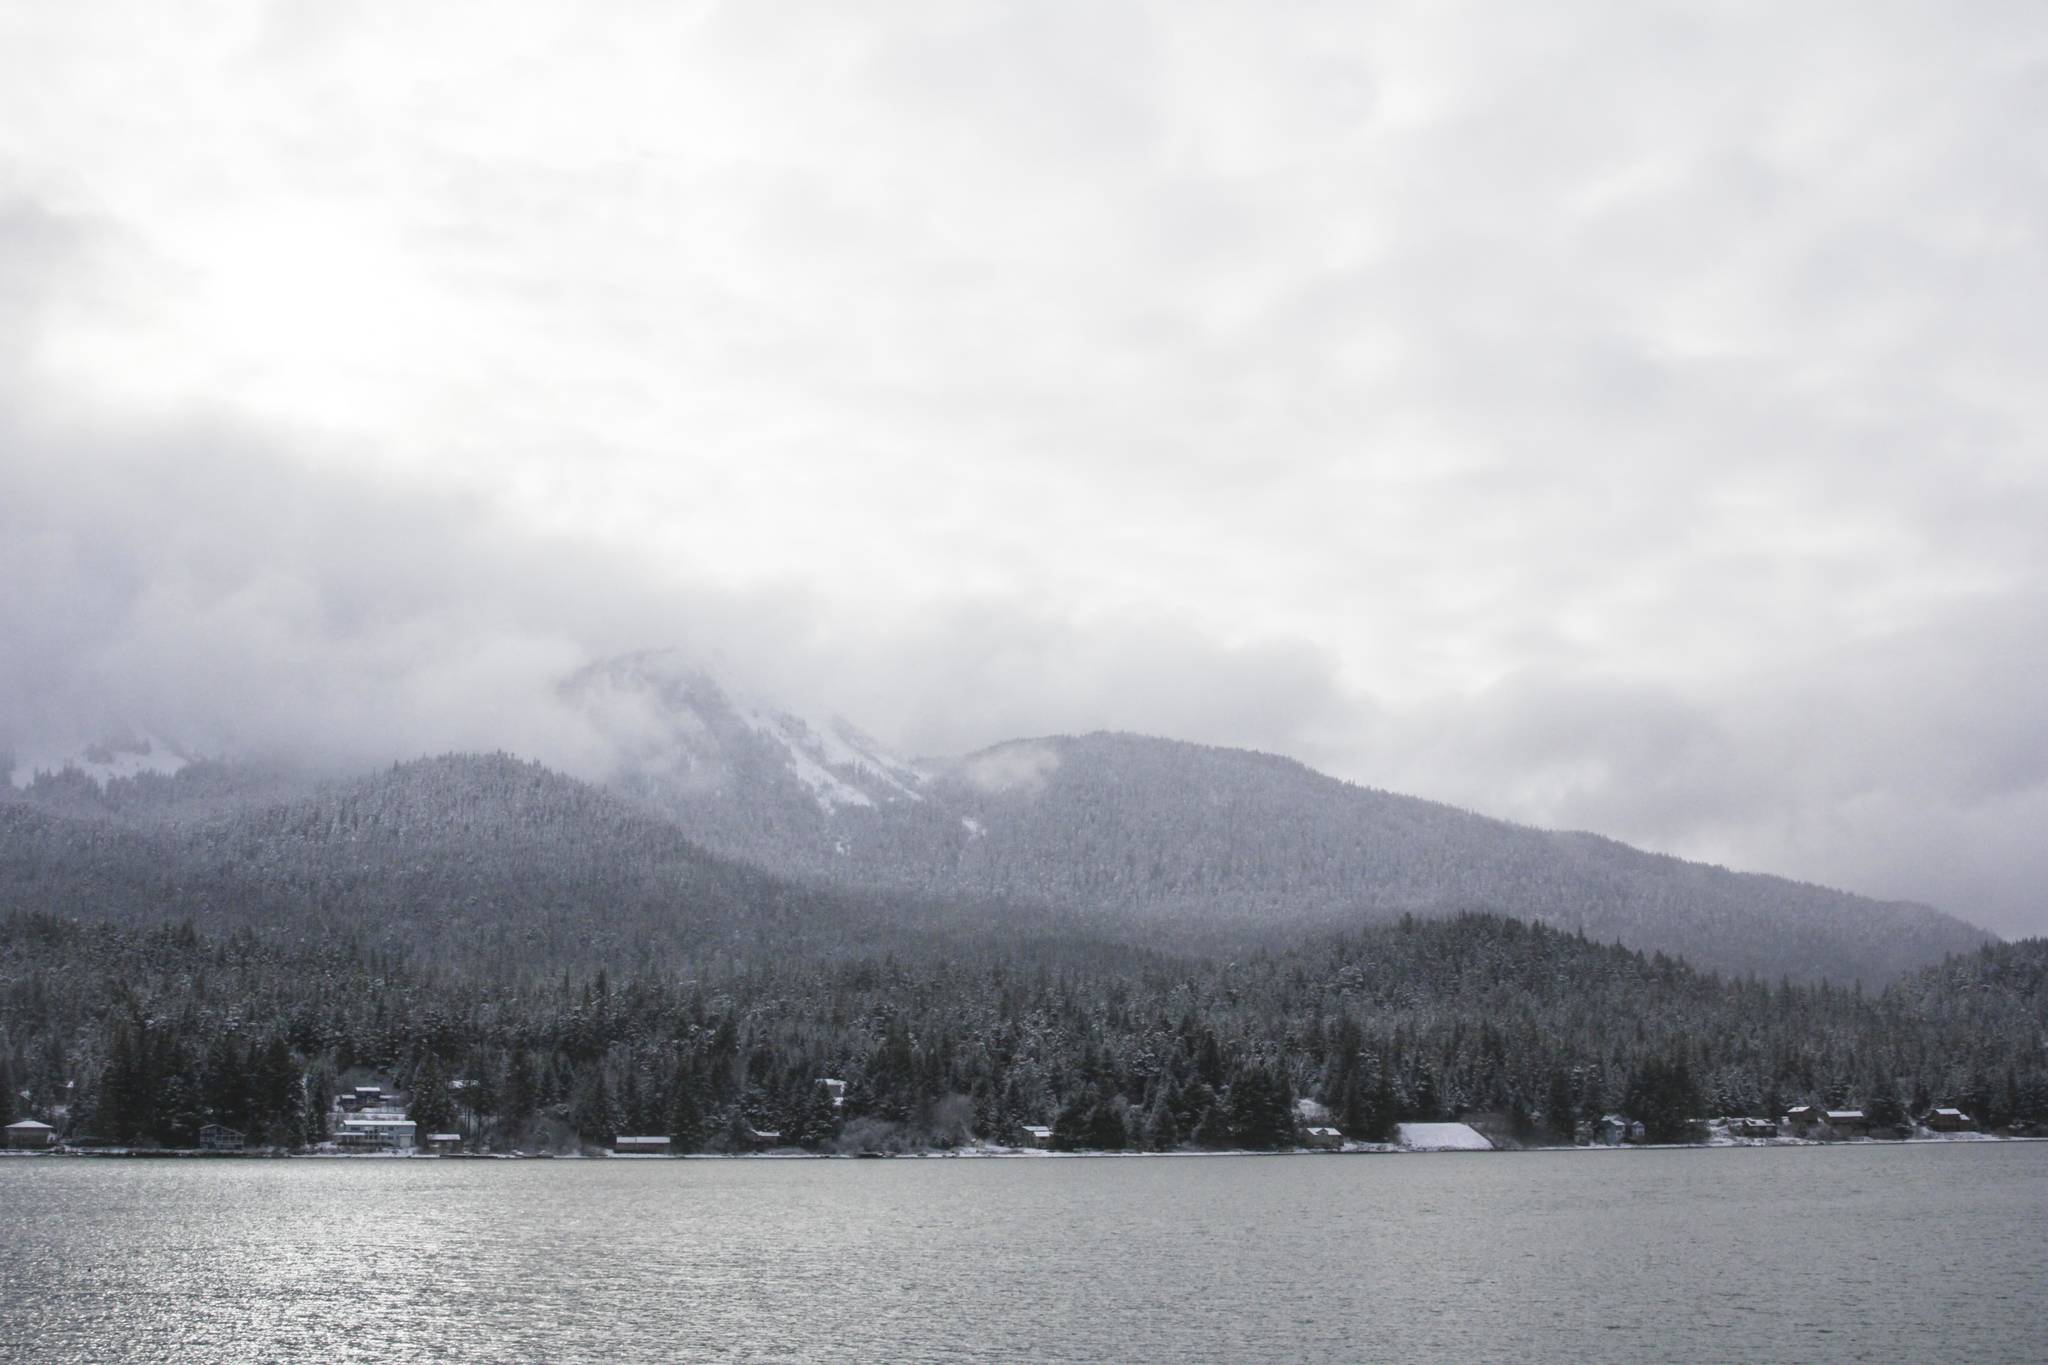 Cold, clear weather is expected for Juneau for the next several days, according to the National Weather Service, on March 11, 2020. (Michael S. Lockett | Juneau Empire)